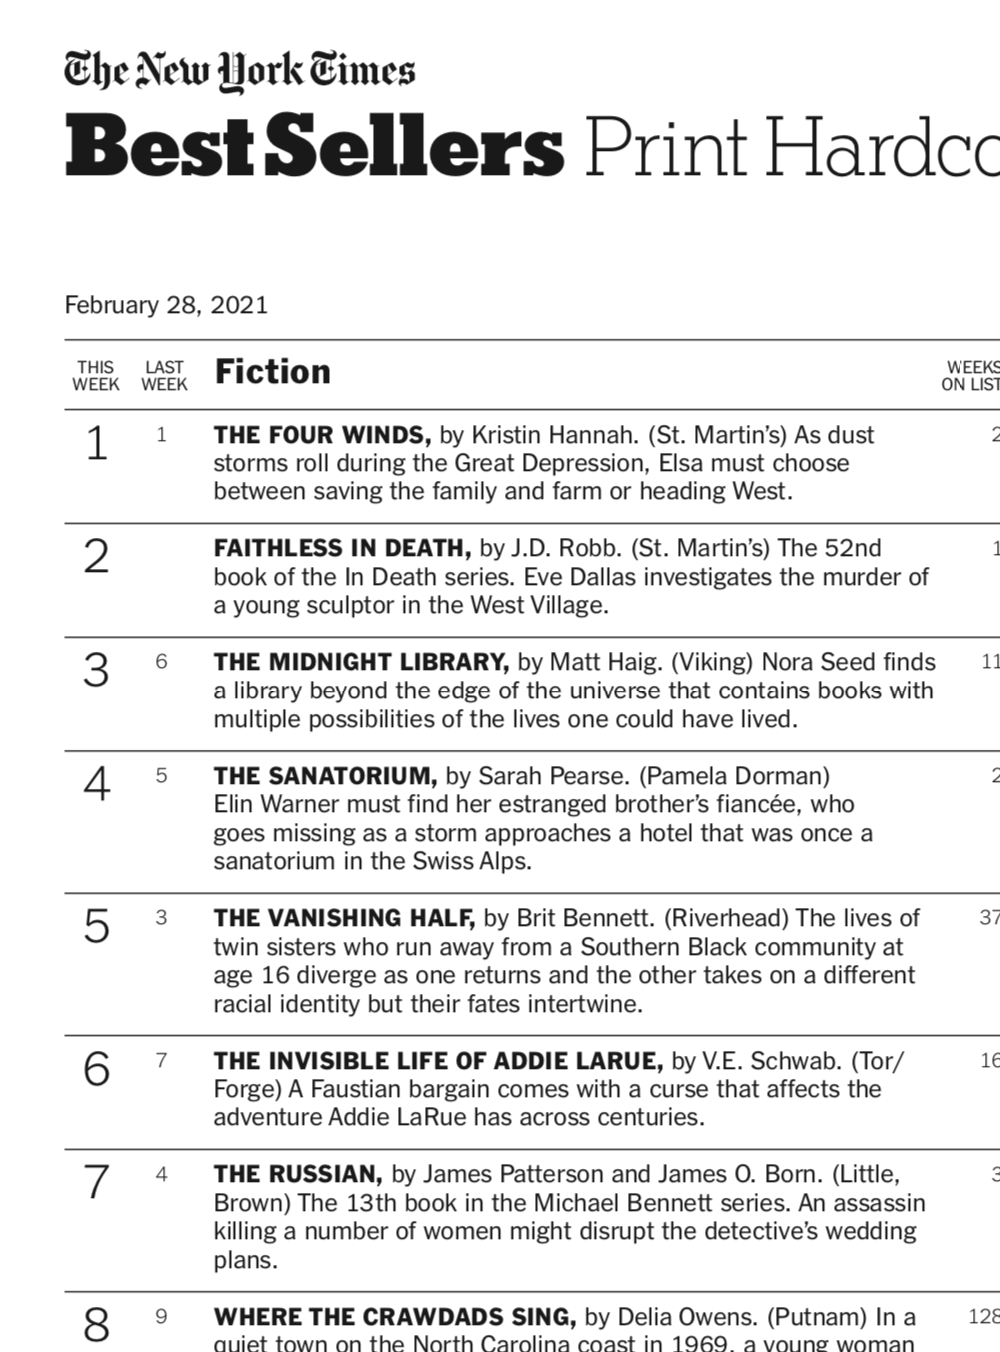 Best Sellers - The New York Times